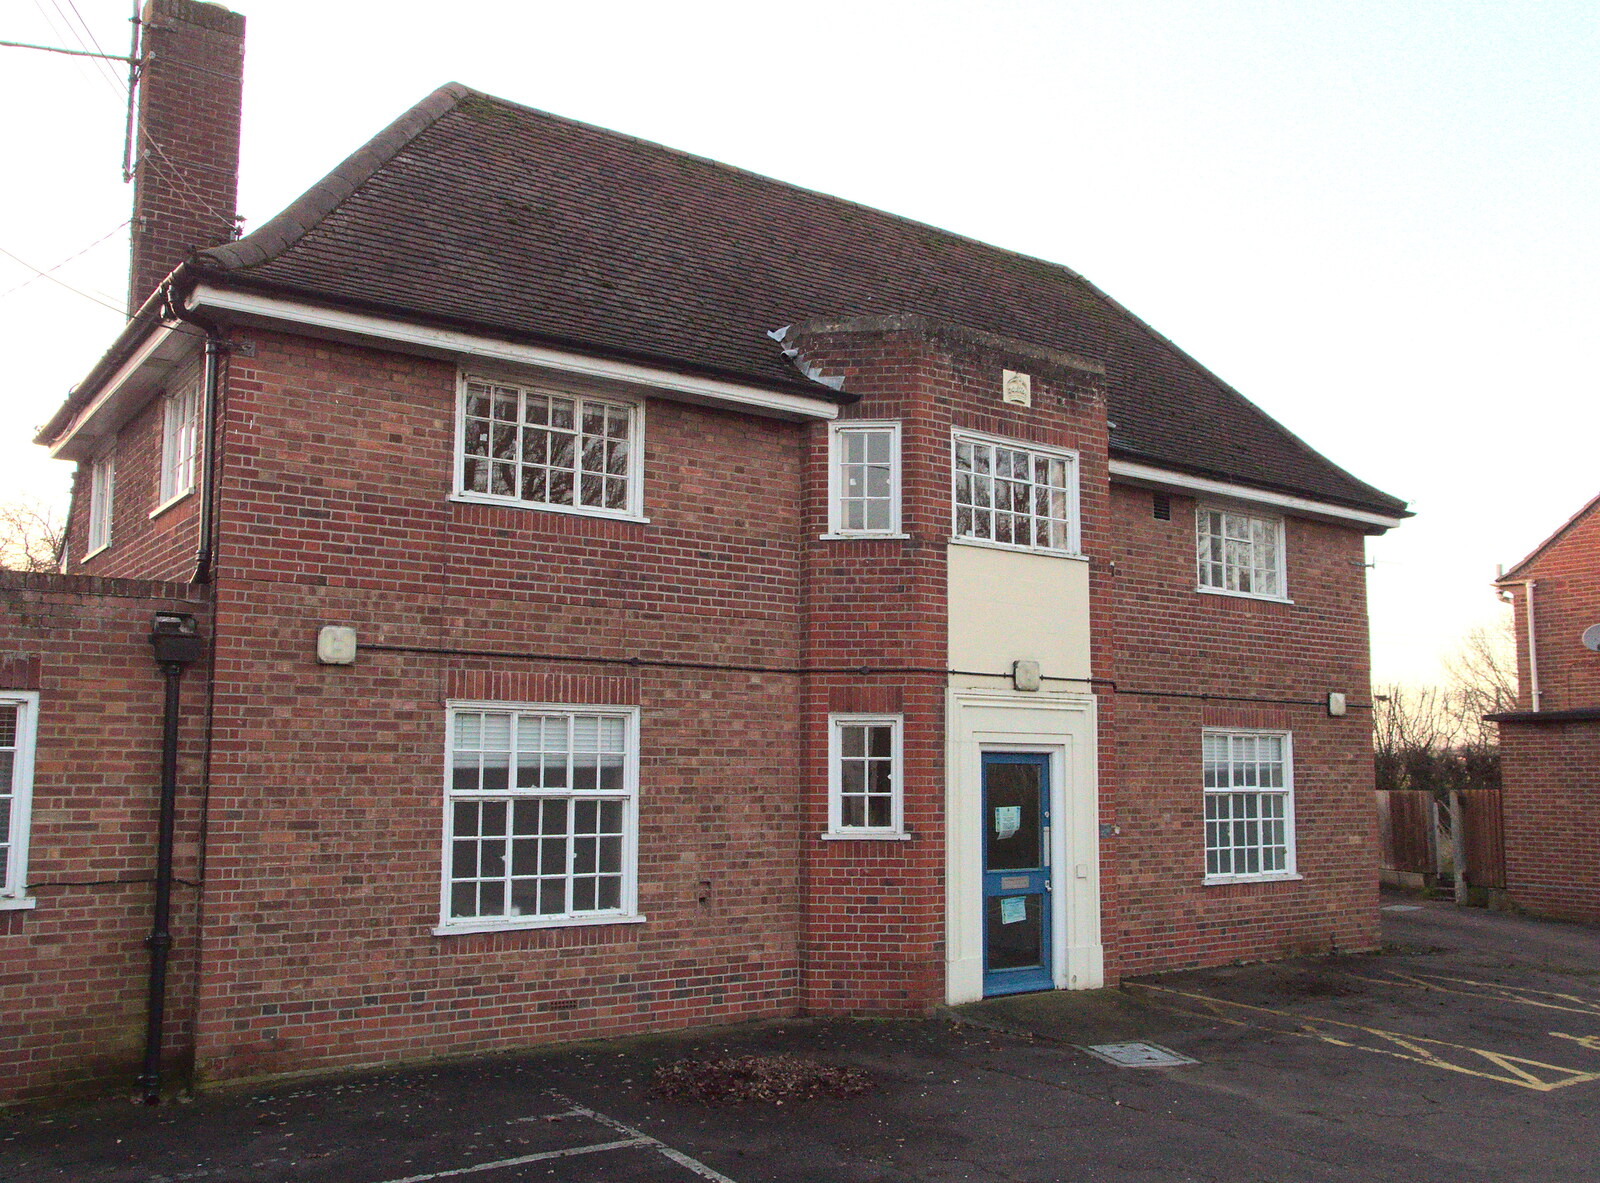 Another view of the police station from Closing Down: A Late January Miscellany, Diss, Norfolk - 31st January 2015